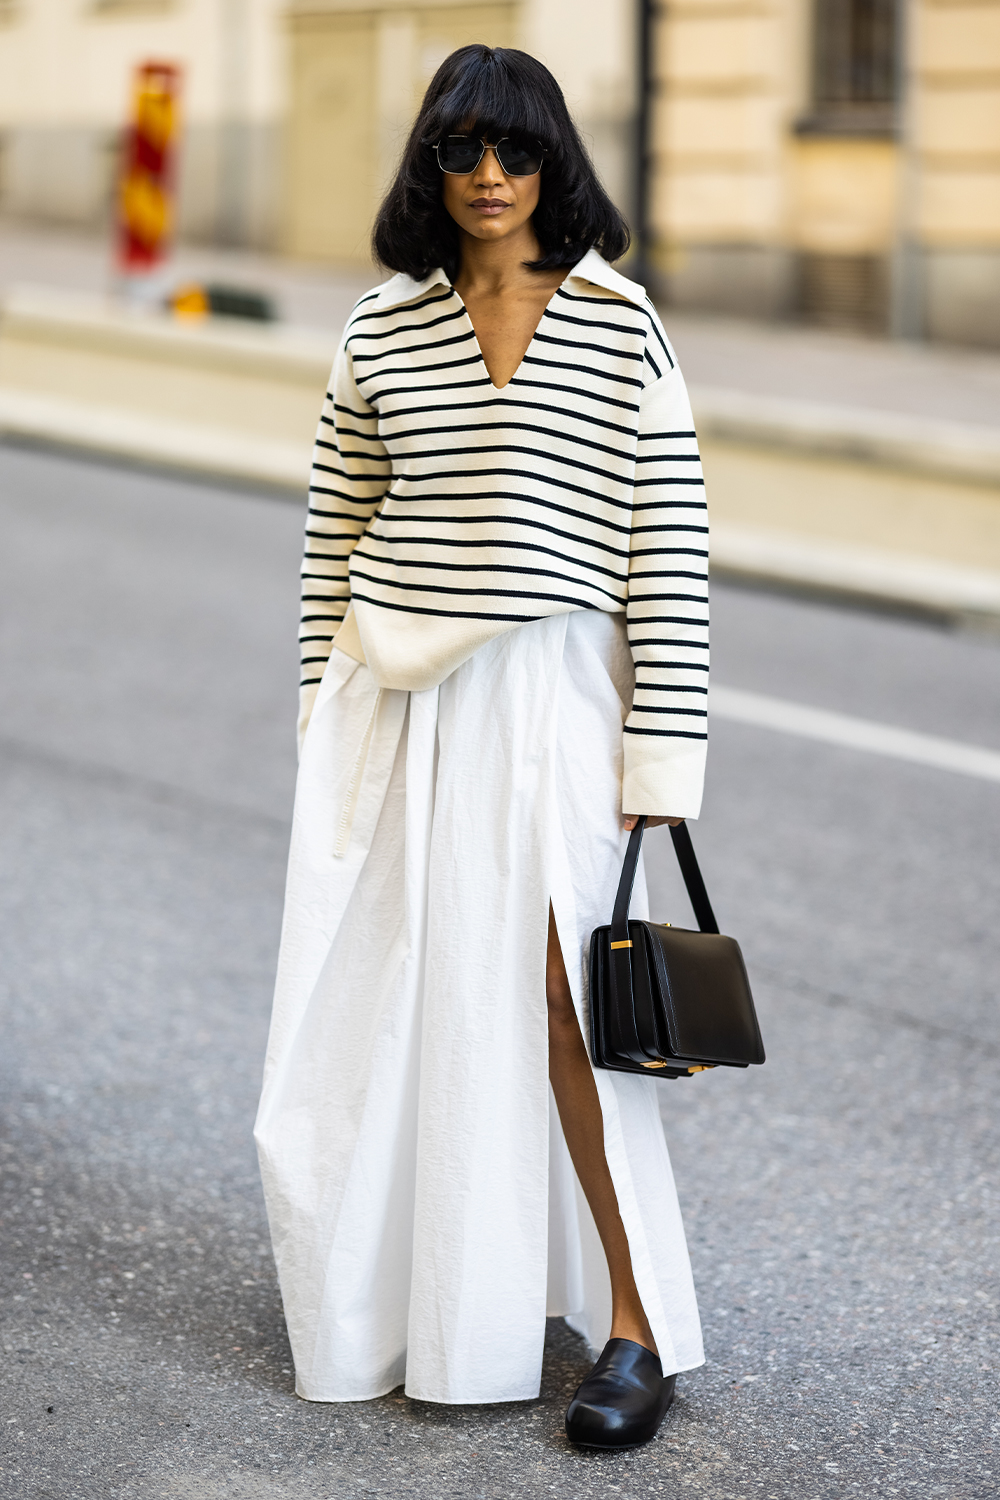 16 Standout Street Style Looks From Stockholm Fashion Week | Who What ...